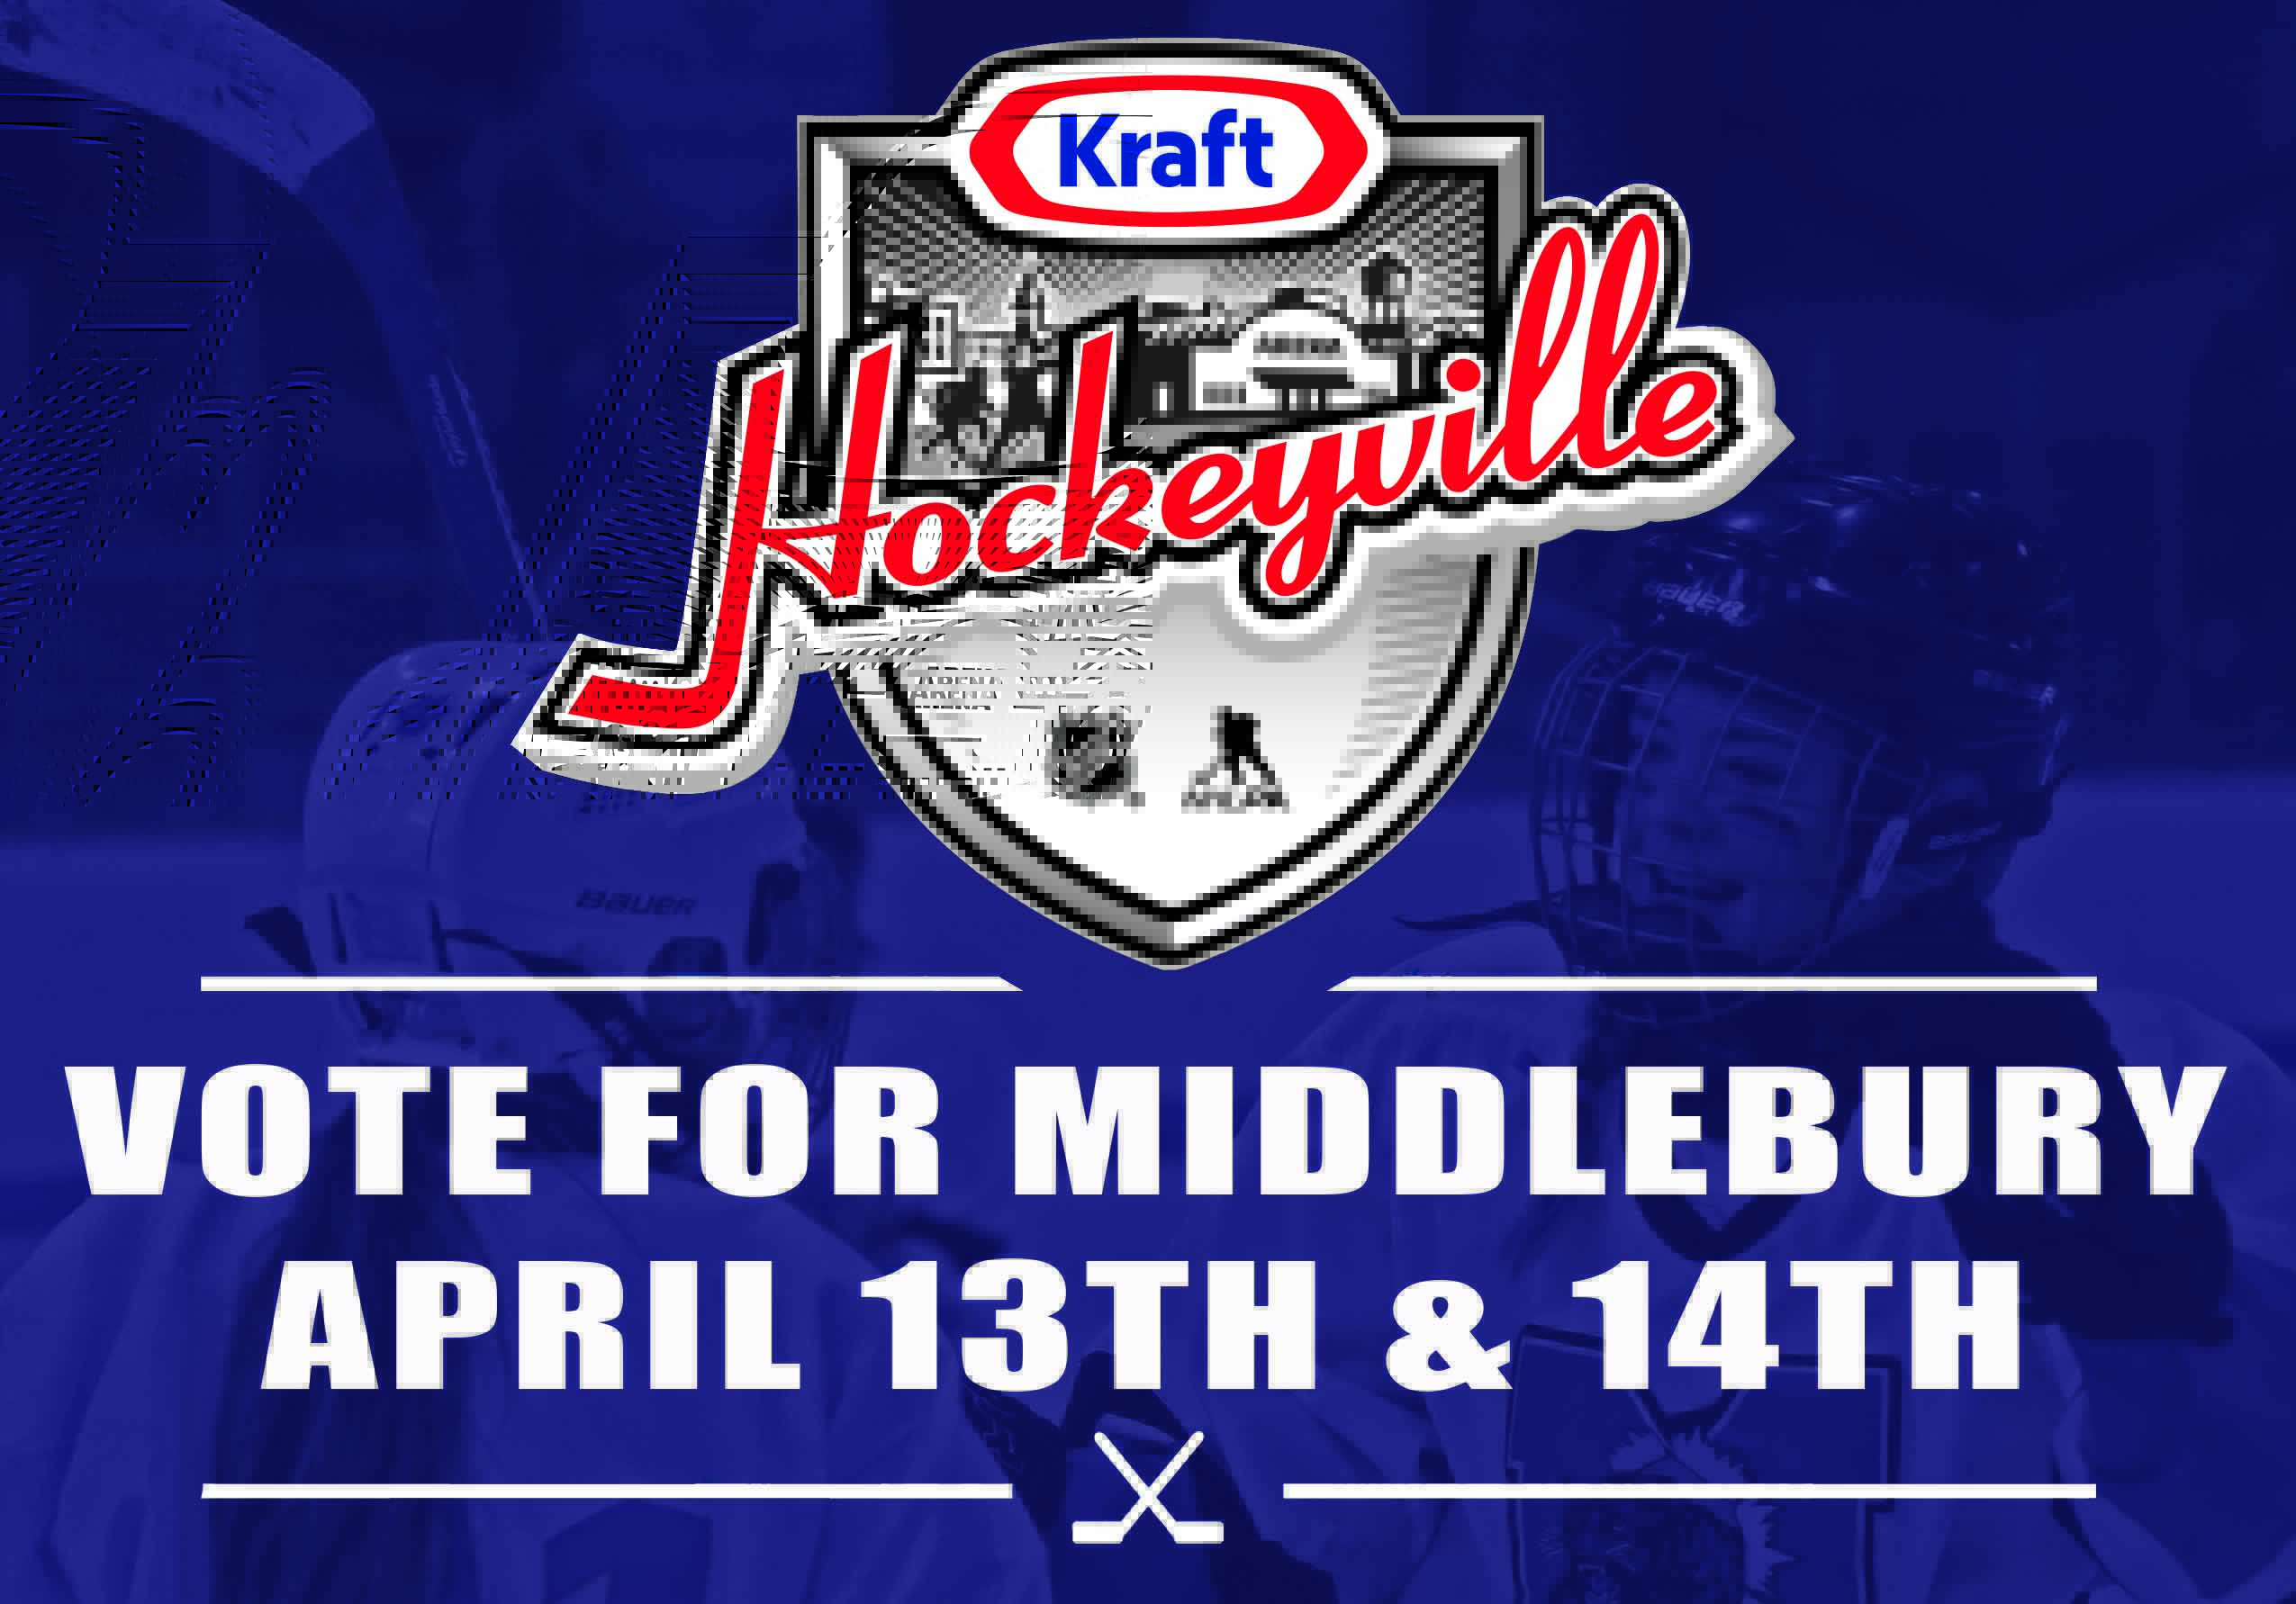 MIDDLEBURY A FINALIST FOR HOCKEYVILLE 2018